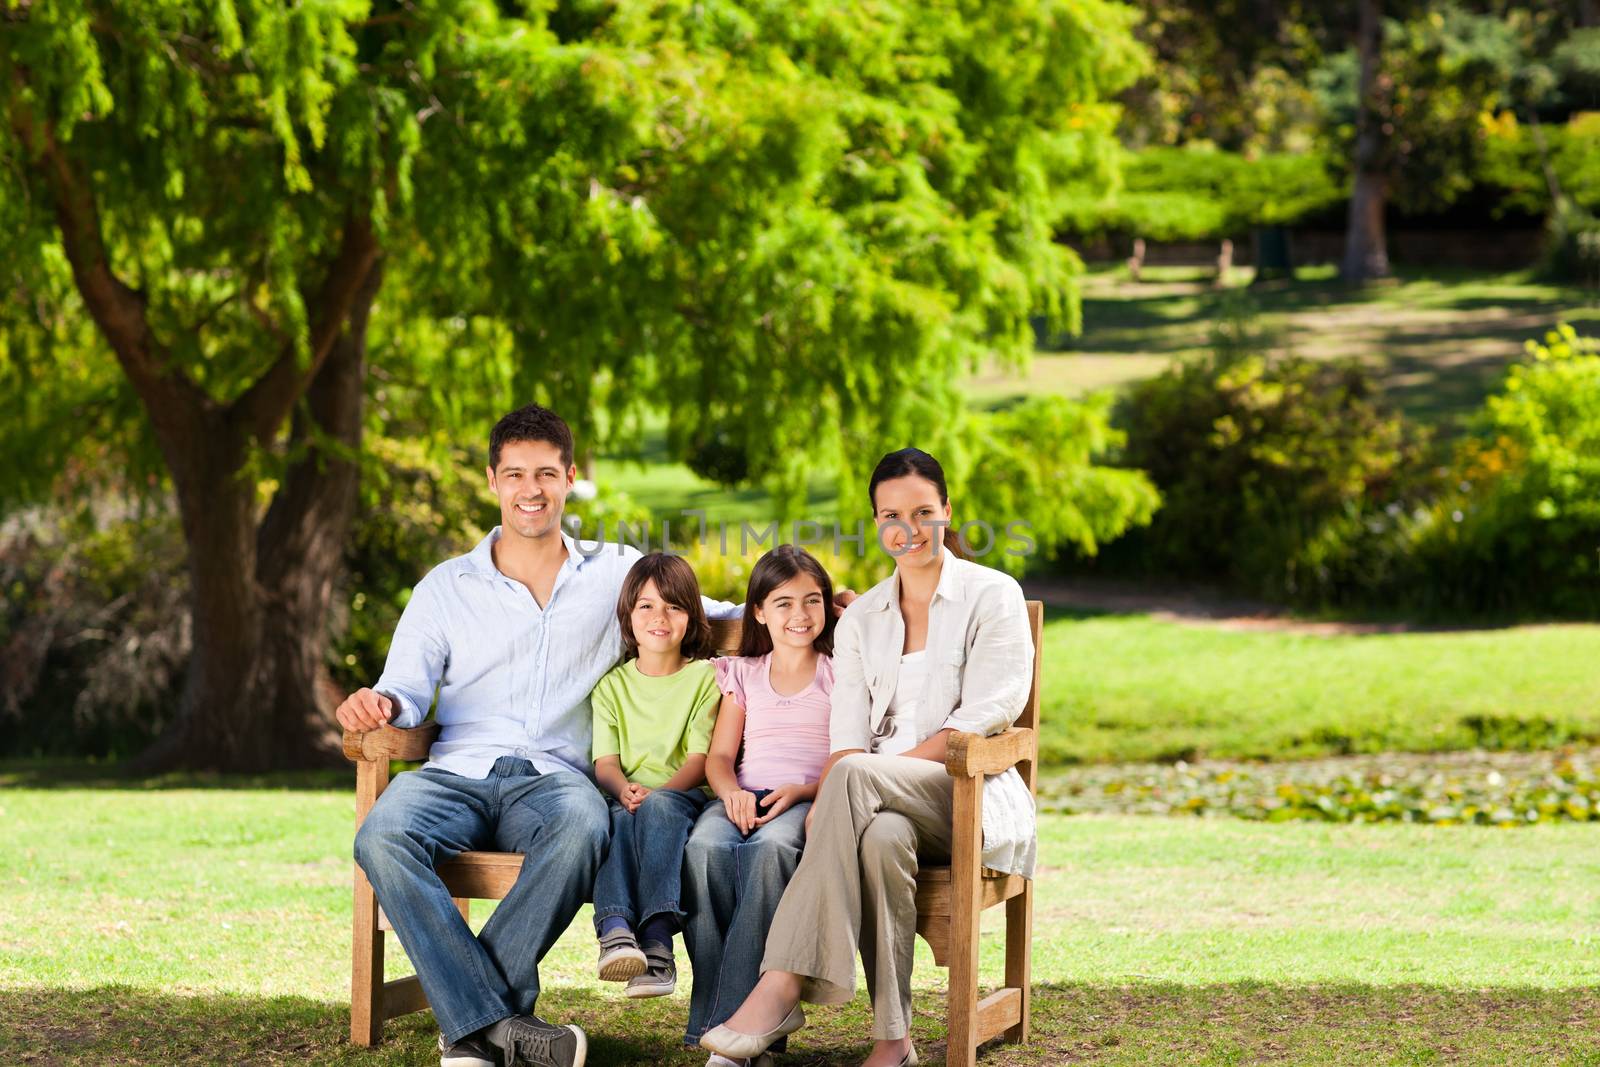 Family on the bench in a park